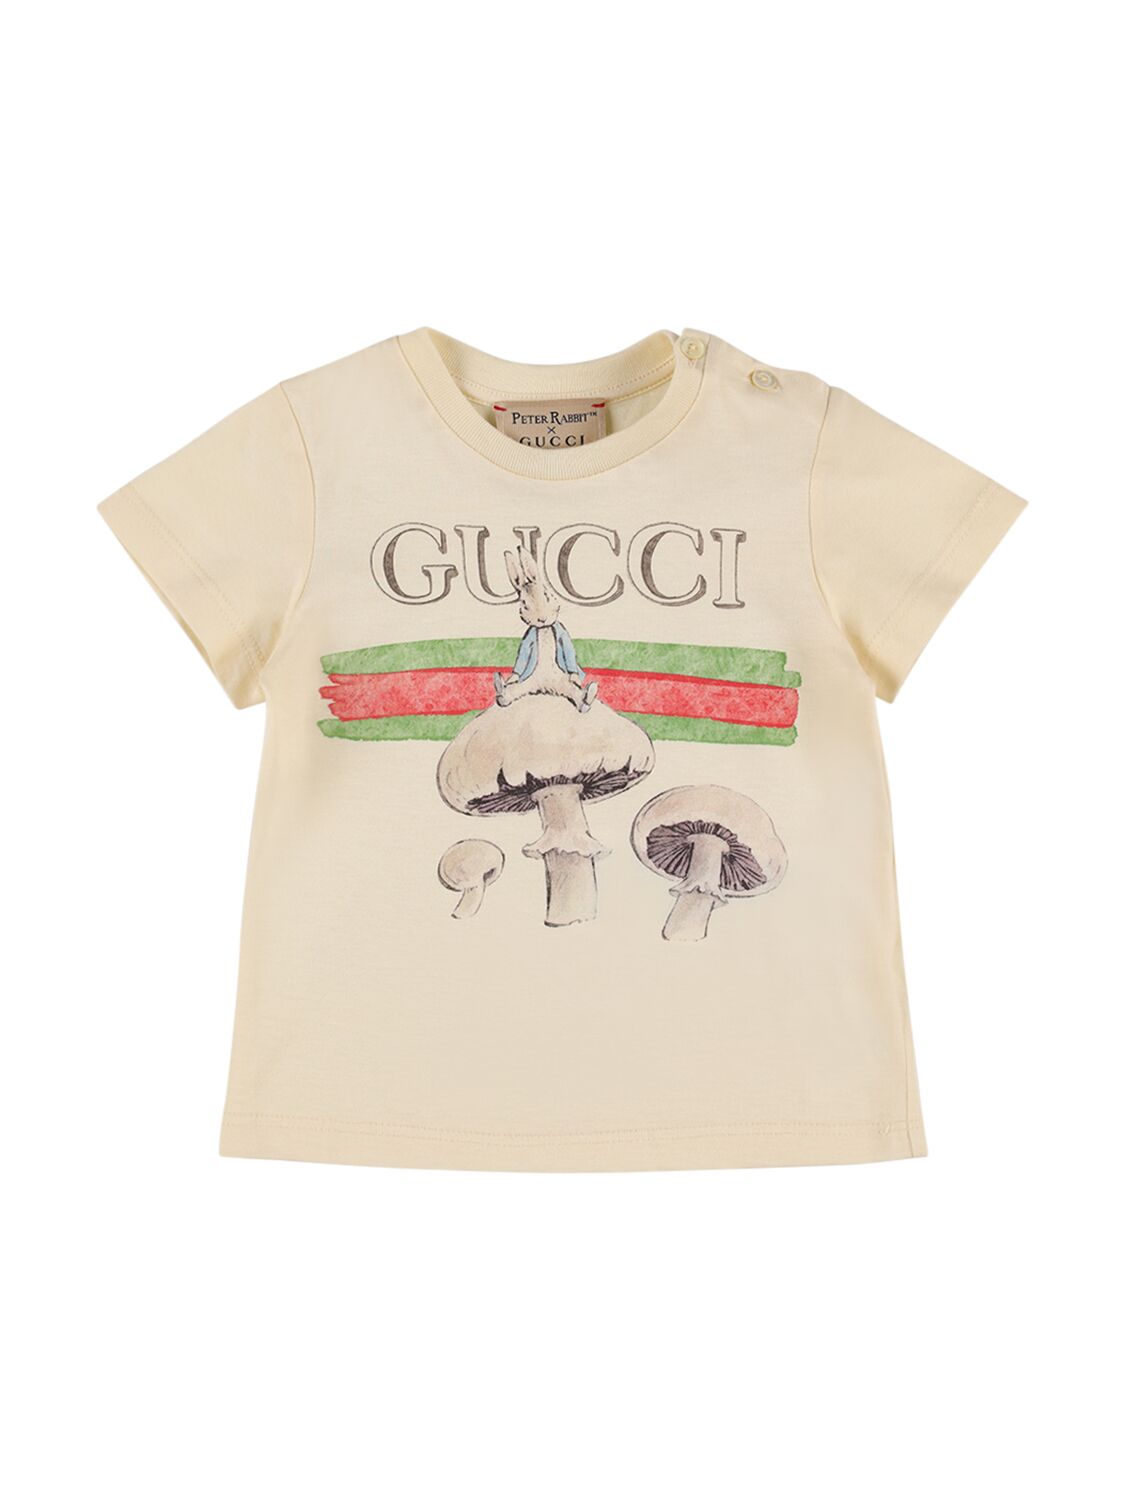 Gucci Kids' Peter Rabbit Cotton Jersey T-shirt In Sunkissed,multi